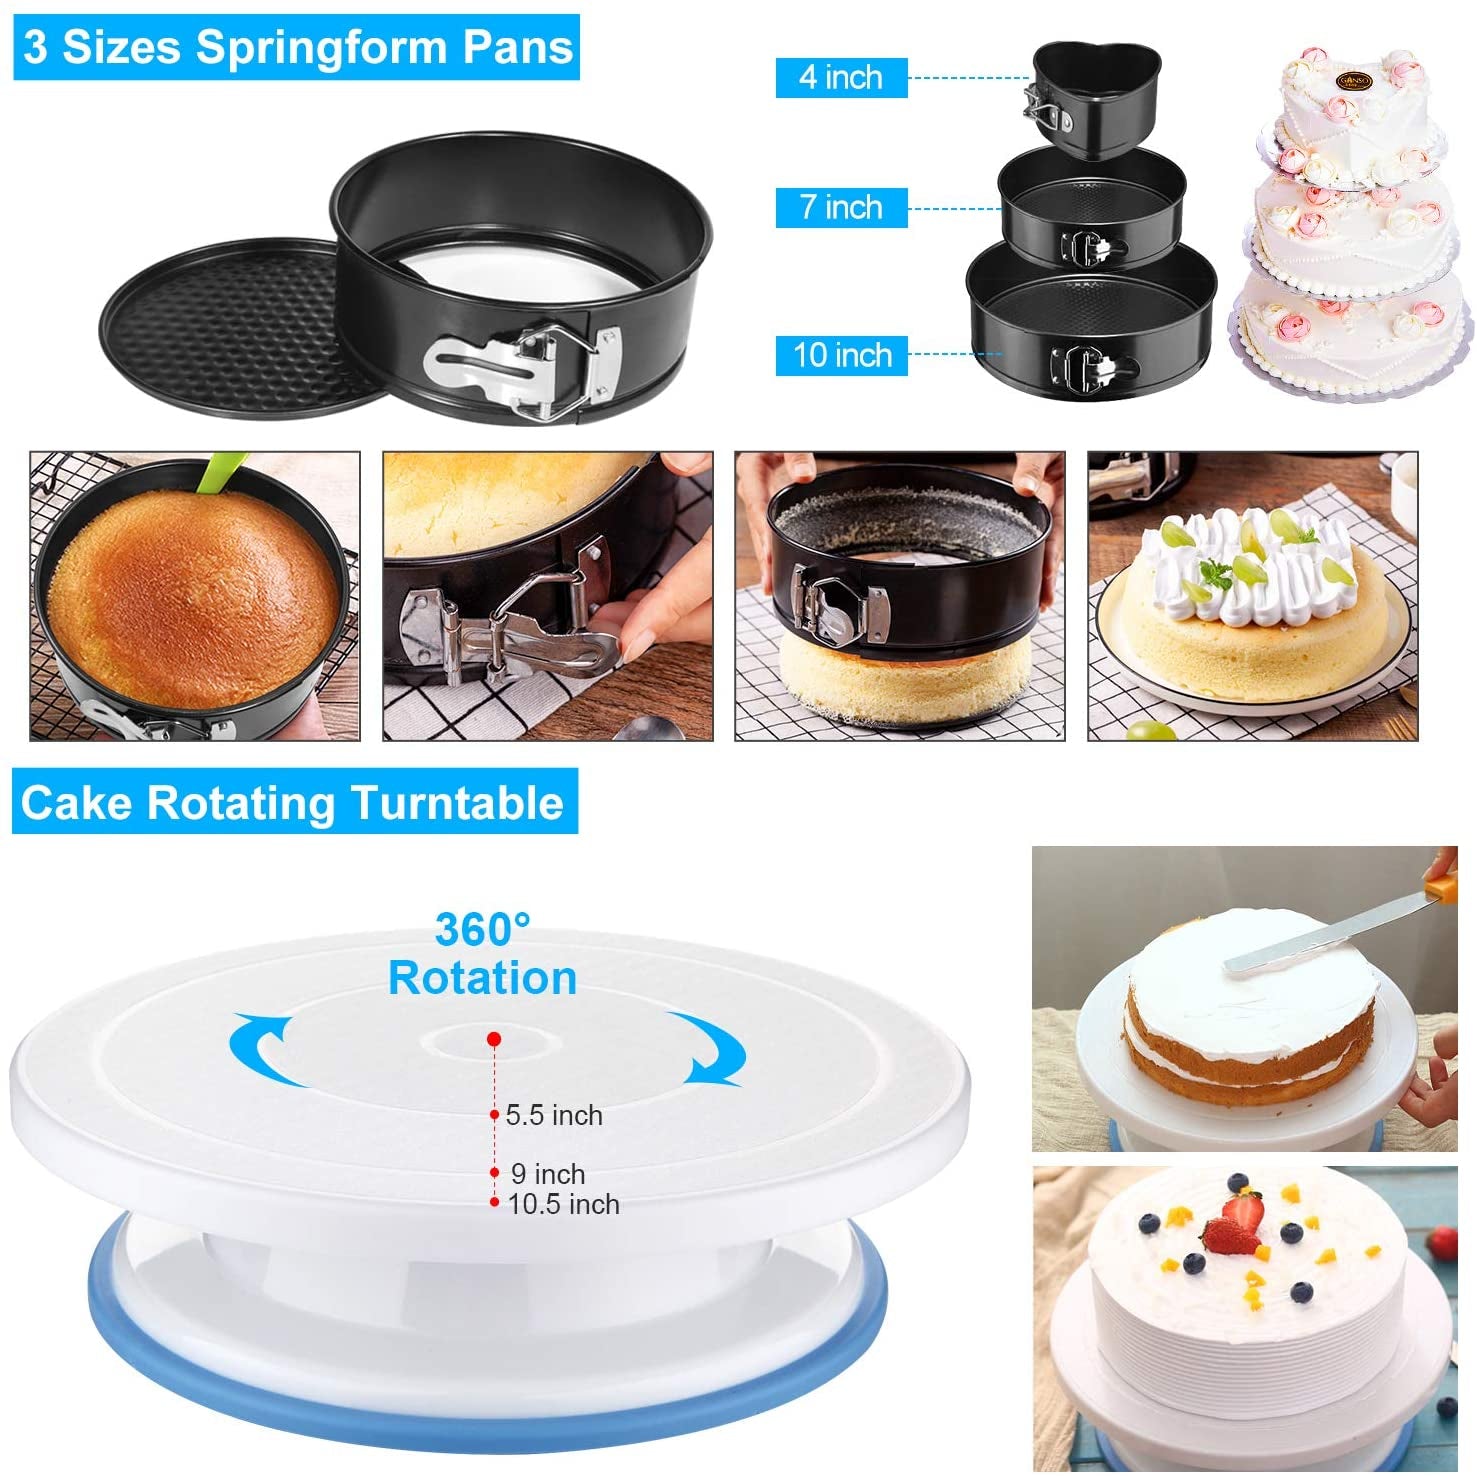 Greenstone Cake Baking and Decorating Accessories Kitchen Tool Set Price in  India - Buy Greenstone Cake Baking and Decorating Accessories Kitchen Tool  Set online at Flipkart.com